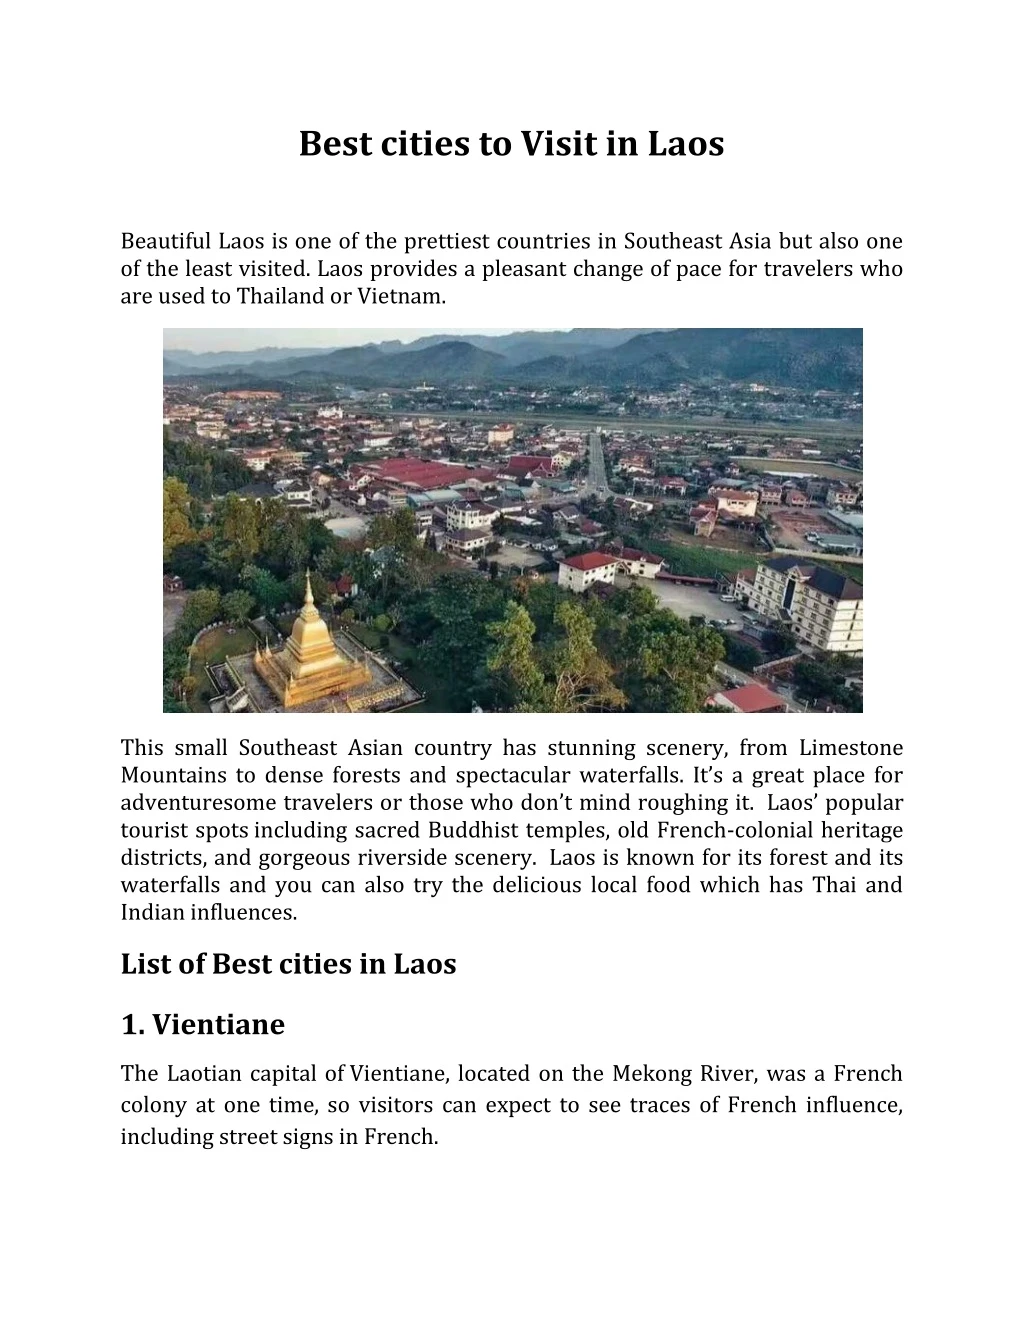 best cities to visit in laos